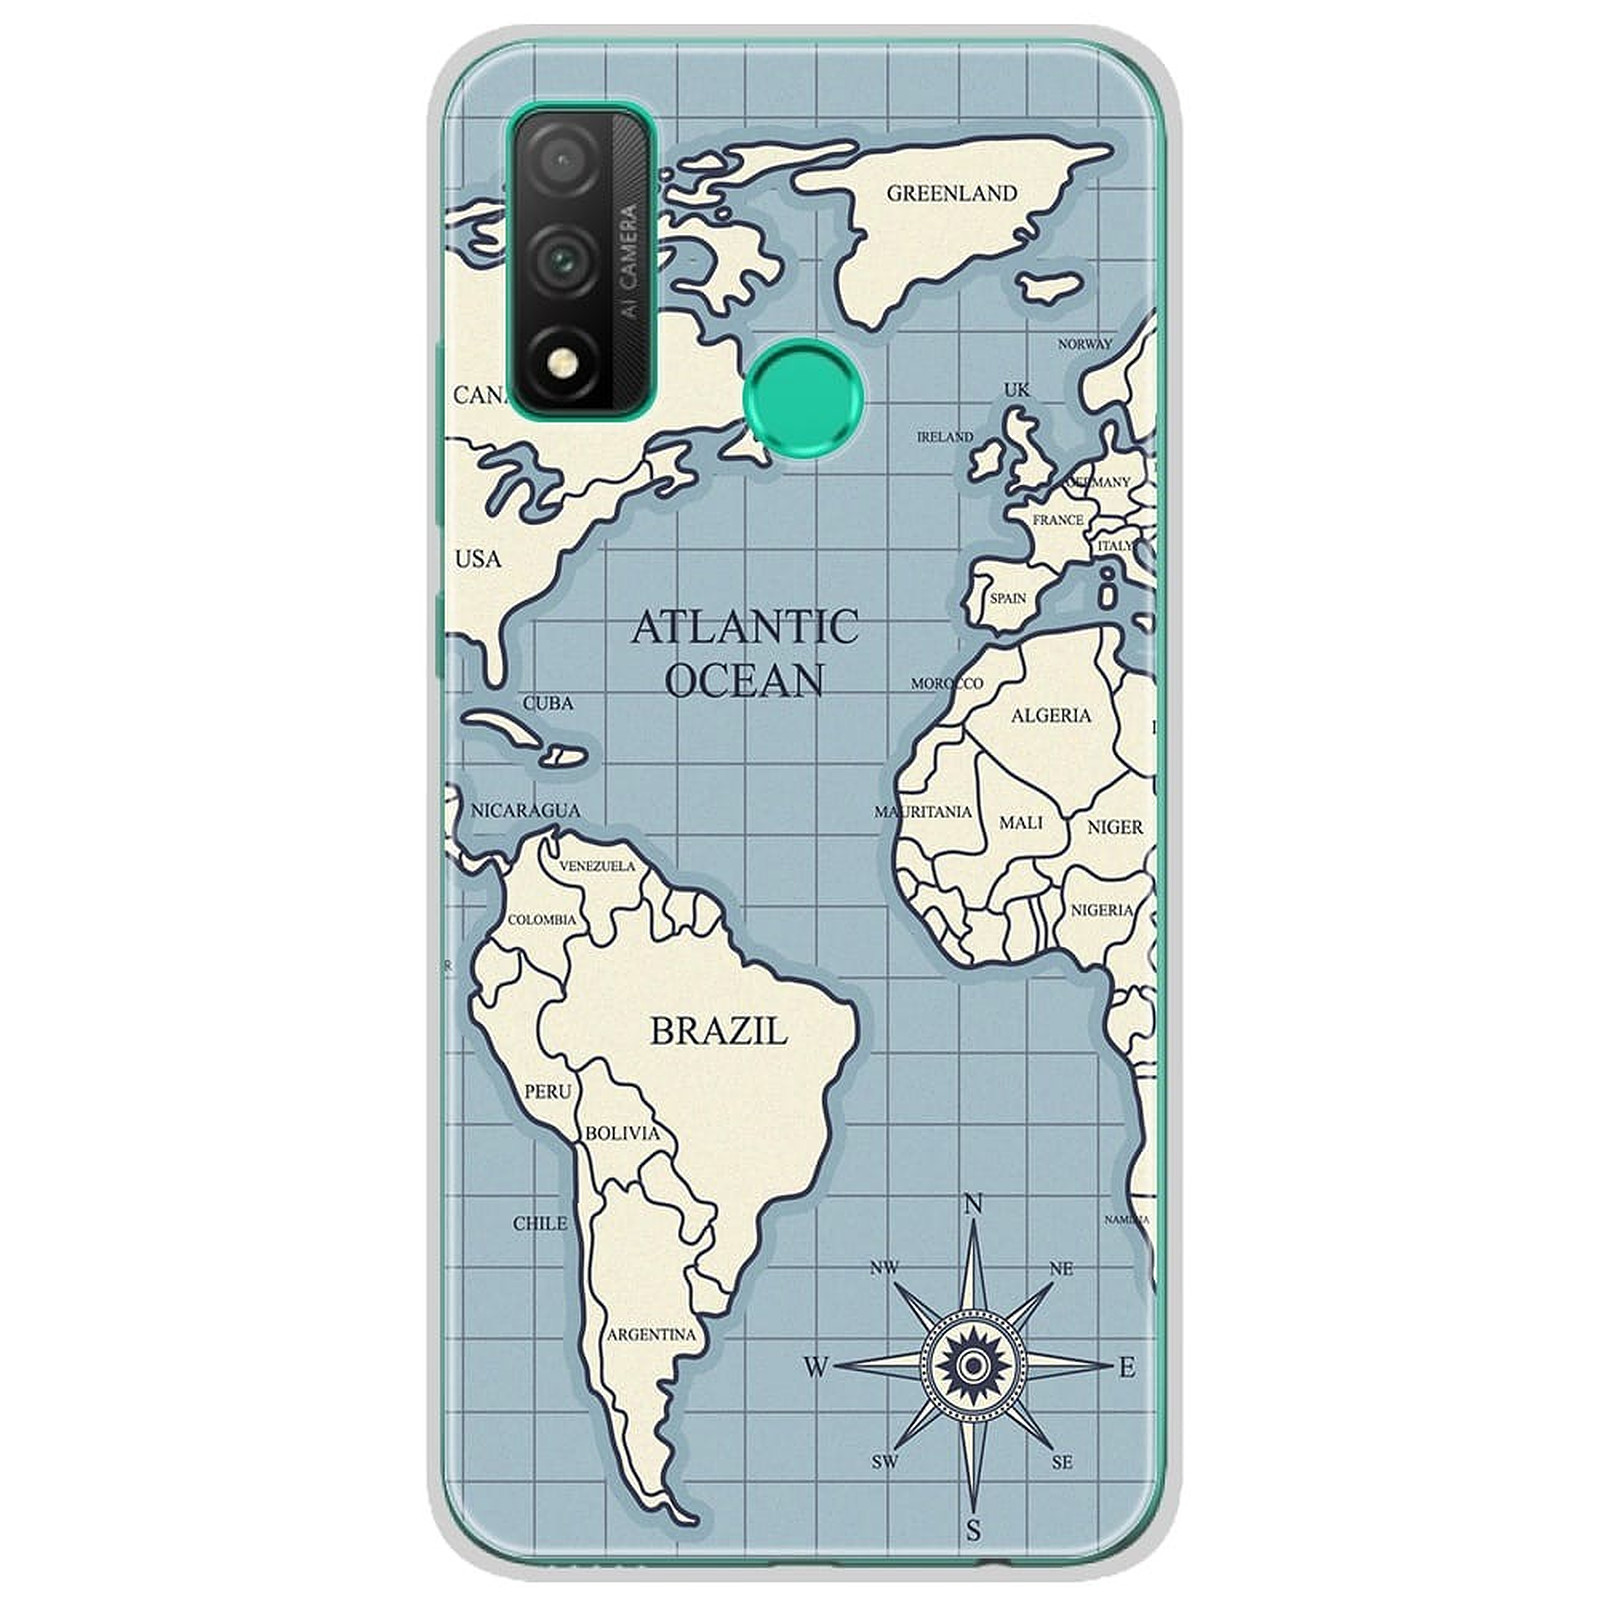 1001 Coques Coque silicone gel Huawei P Smart 2020 motif Map vintage - Coque telephone 1001Coques